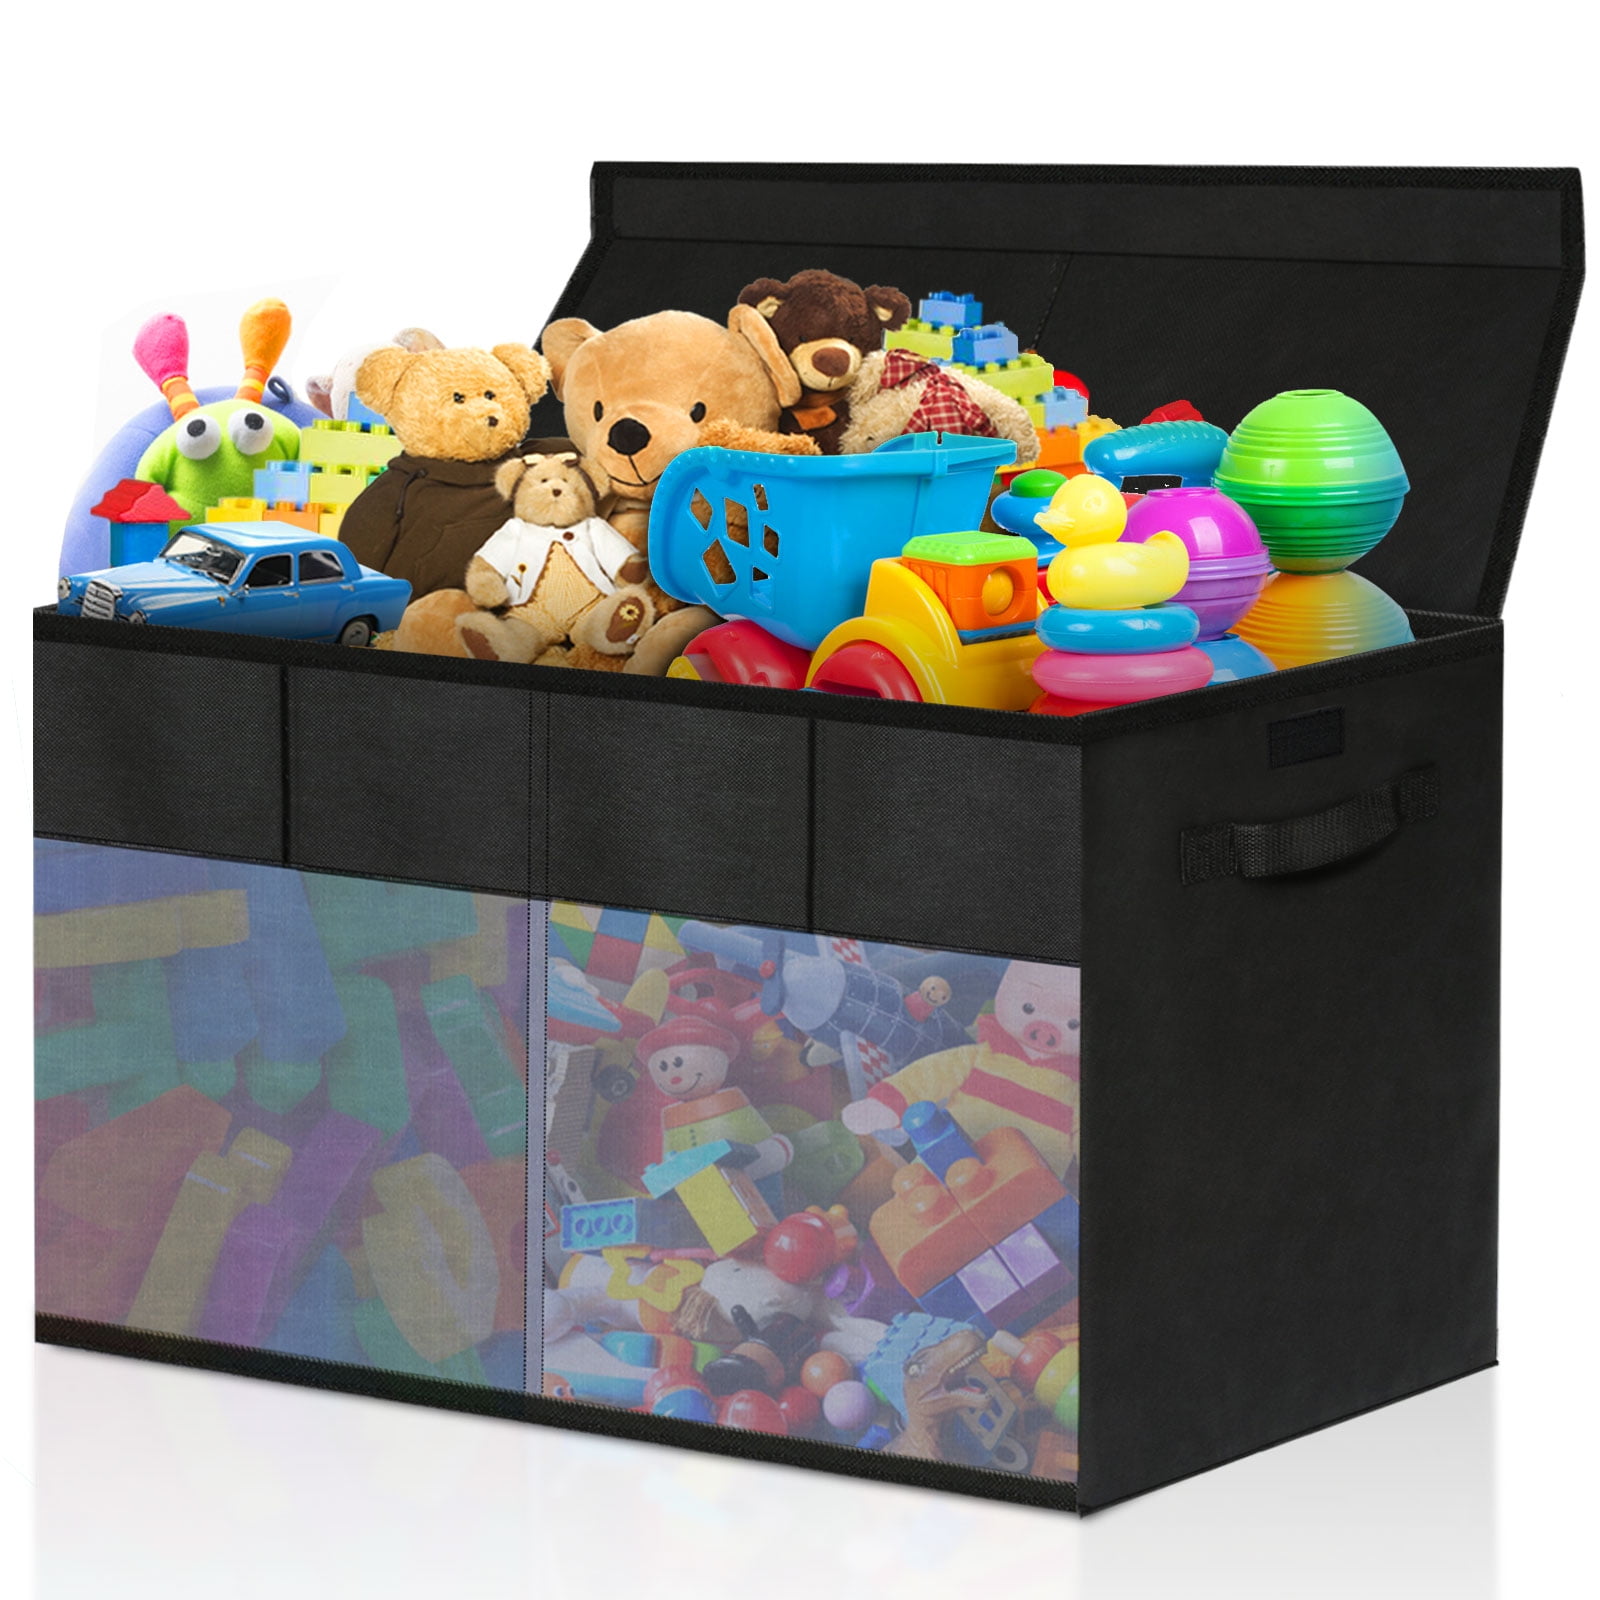 Kids Fabric Storage Box Seat Collapsible Childrens Toy Box Room Tidy Organiser 